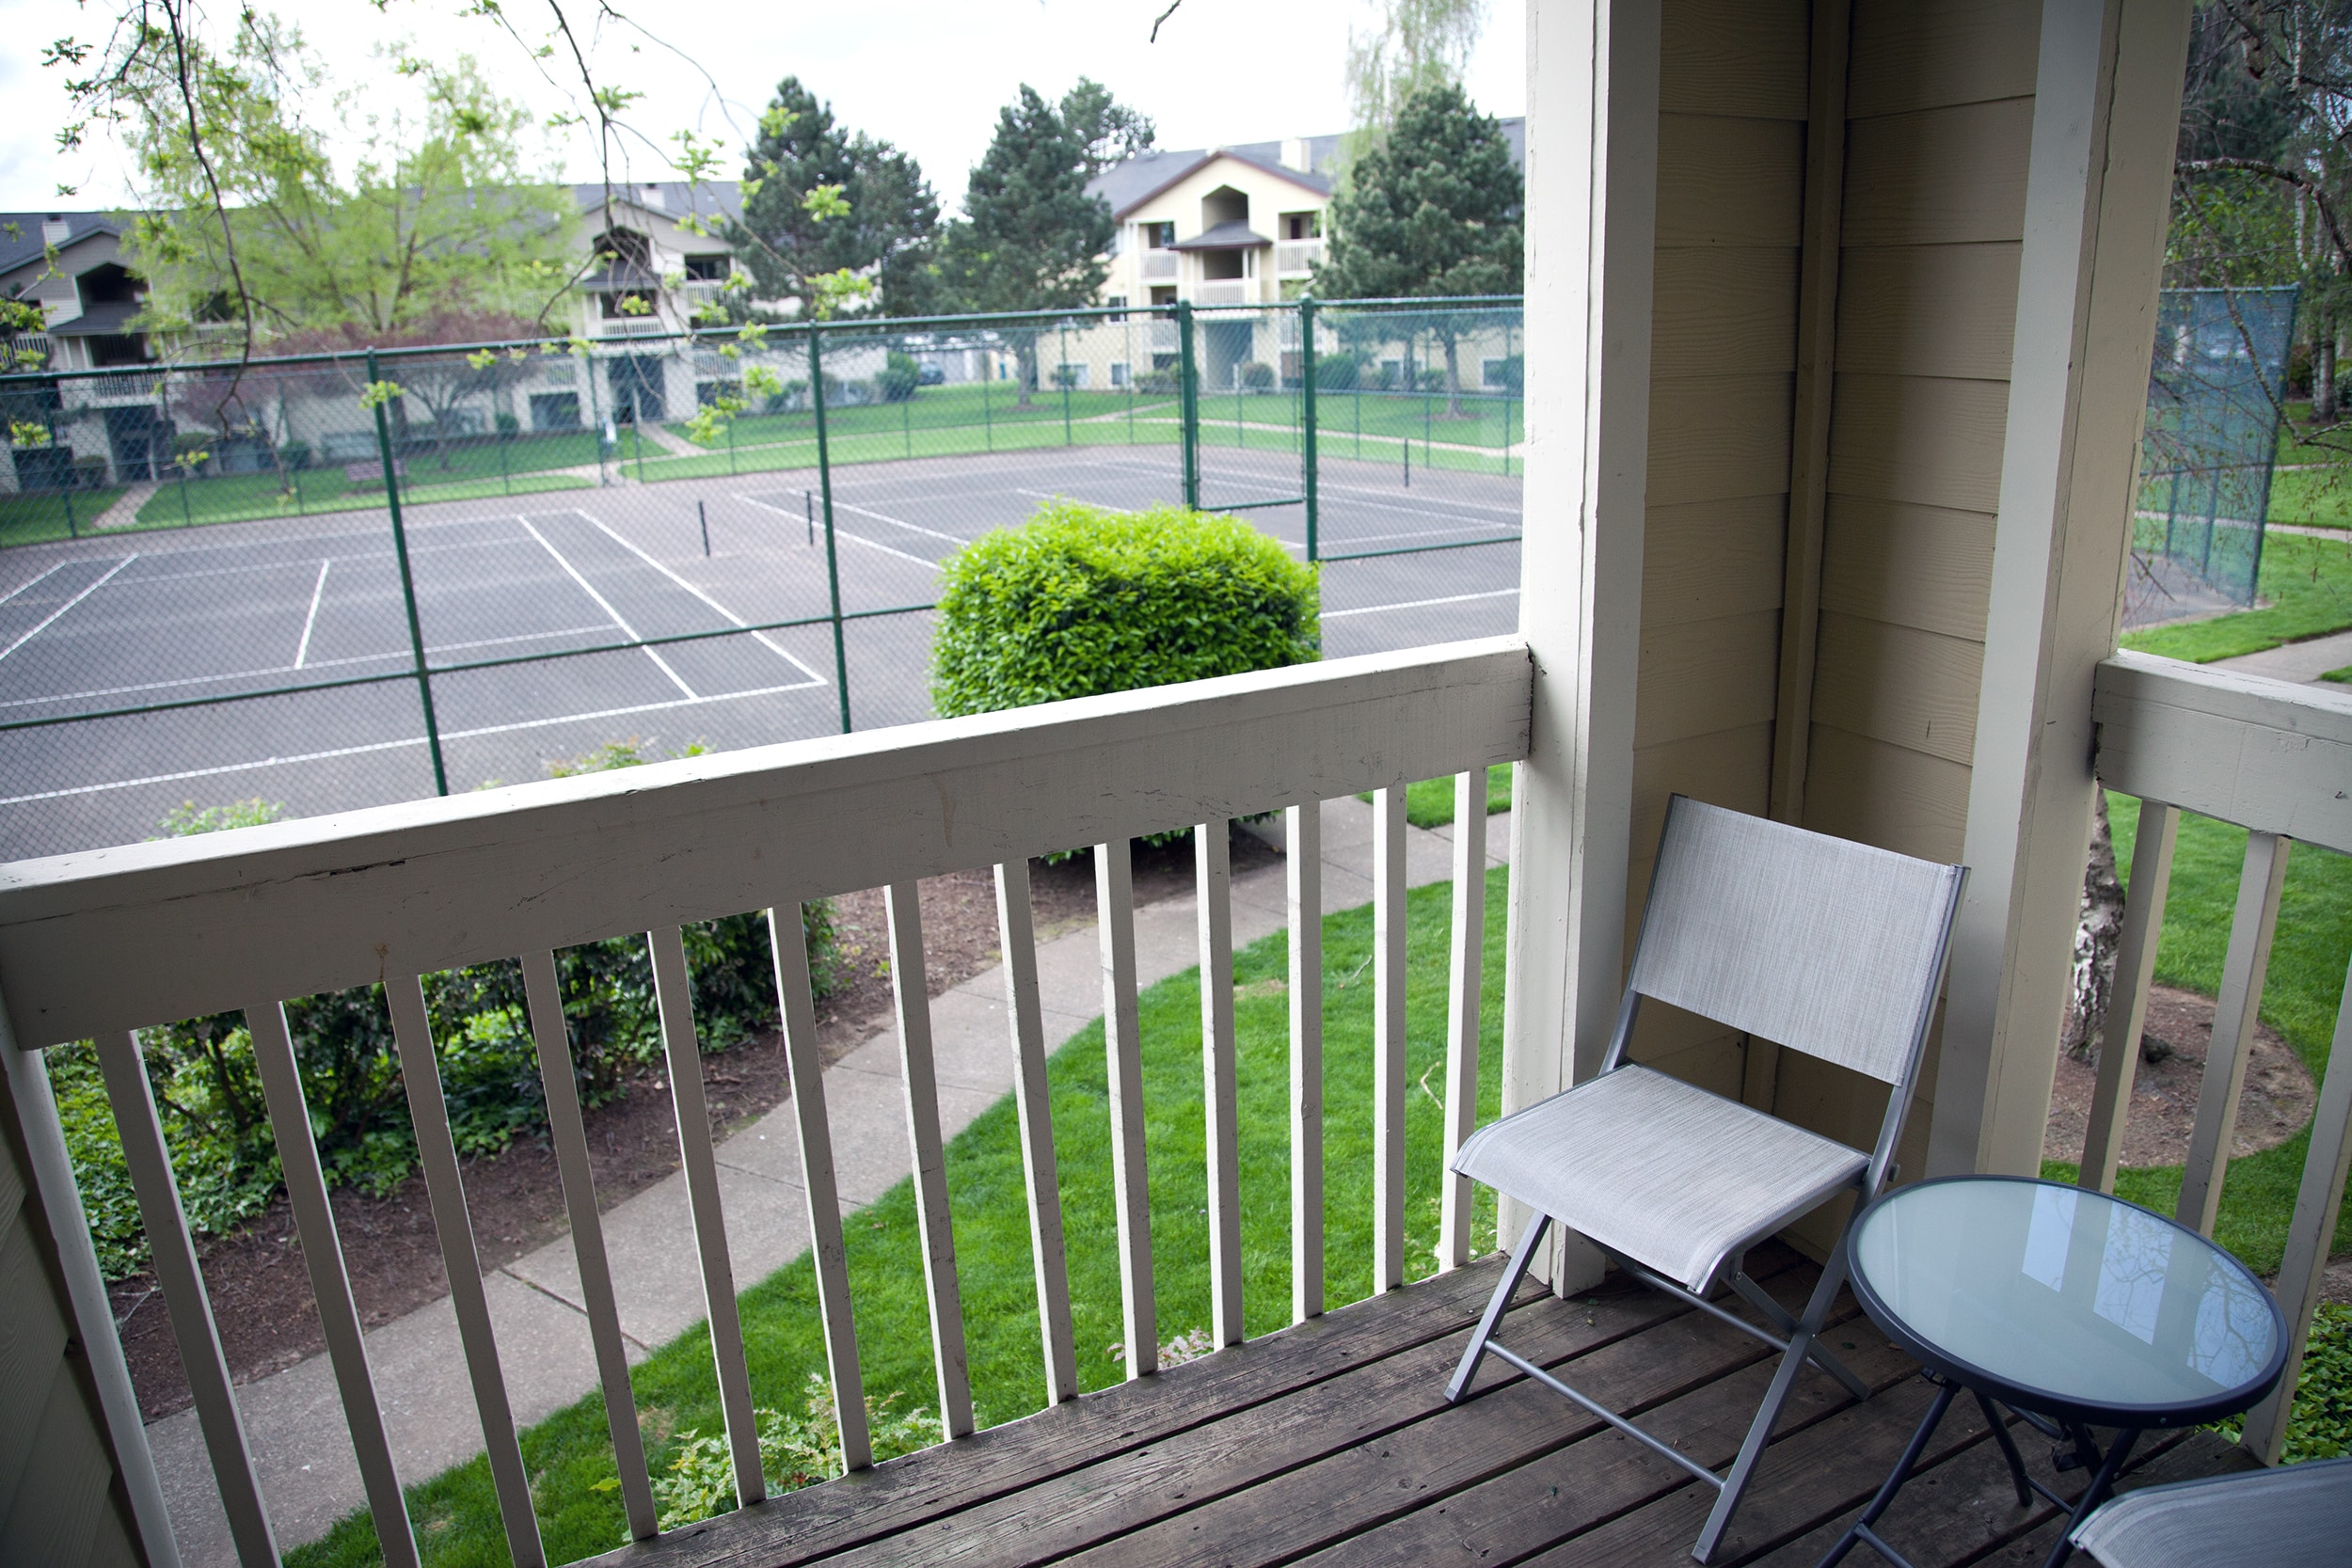 Apartment balcony with table and chair.